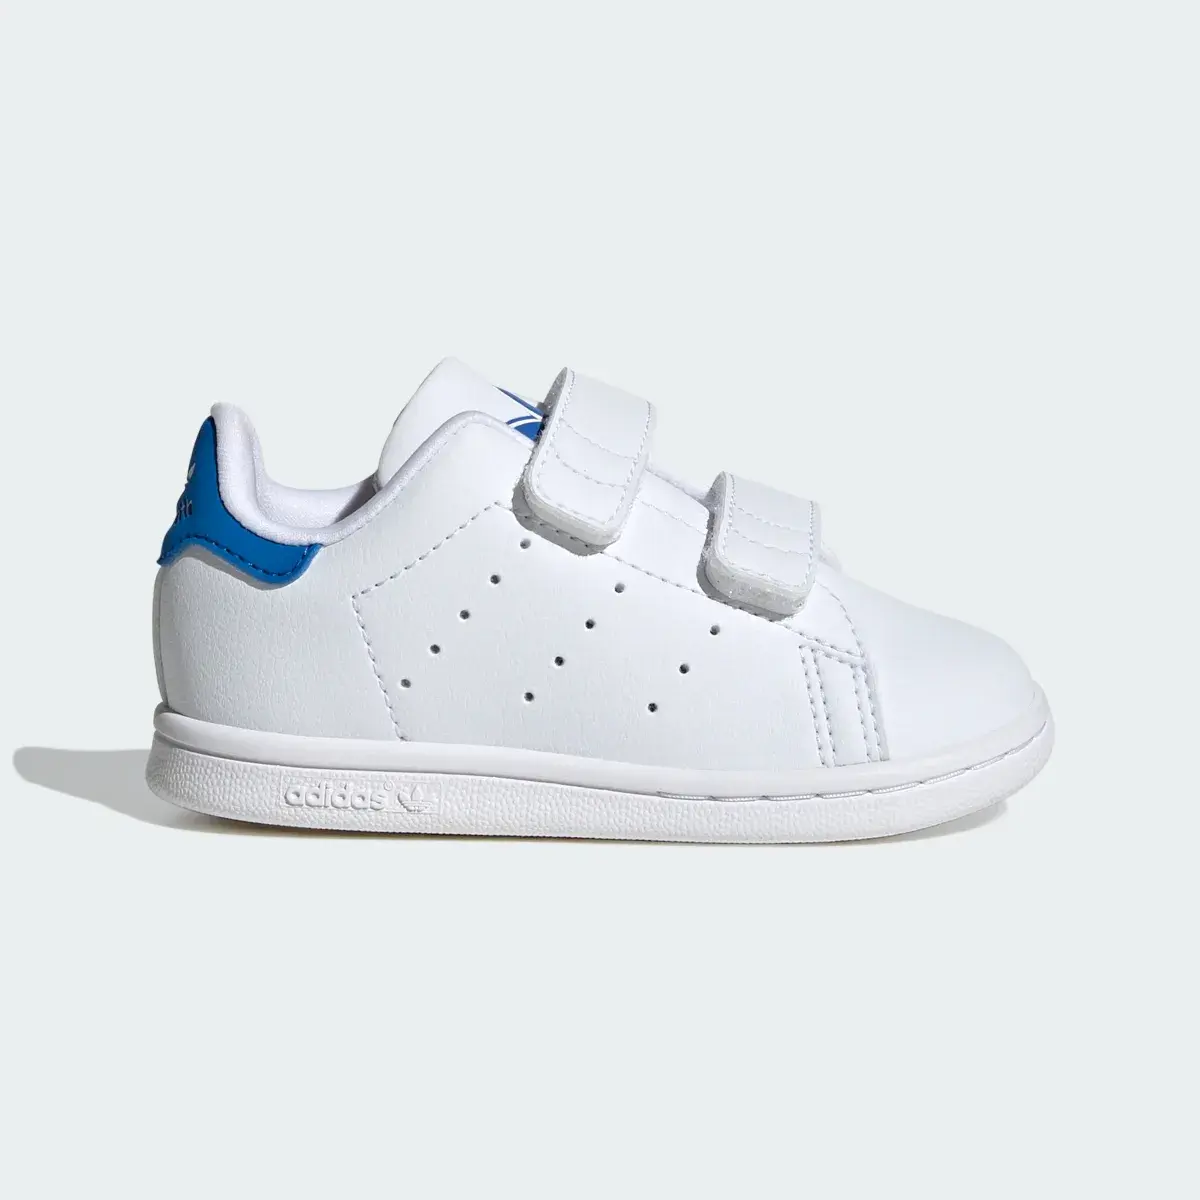 Adidas Stan Smith Comfort Closure Shoes Kids. 2